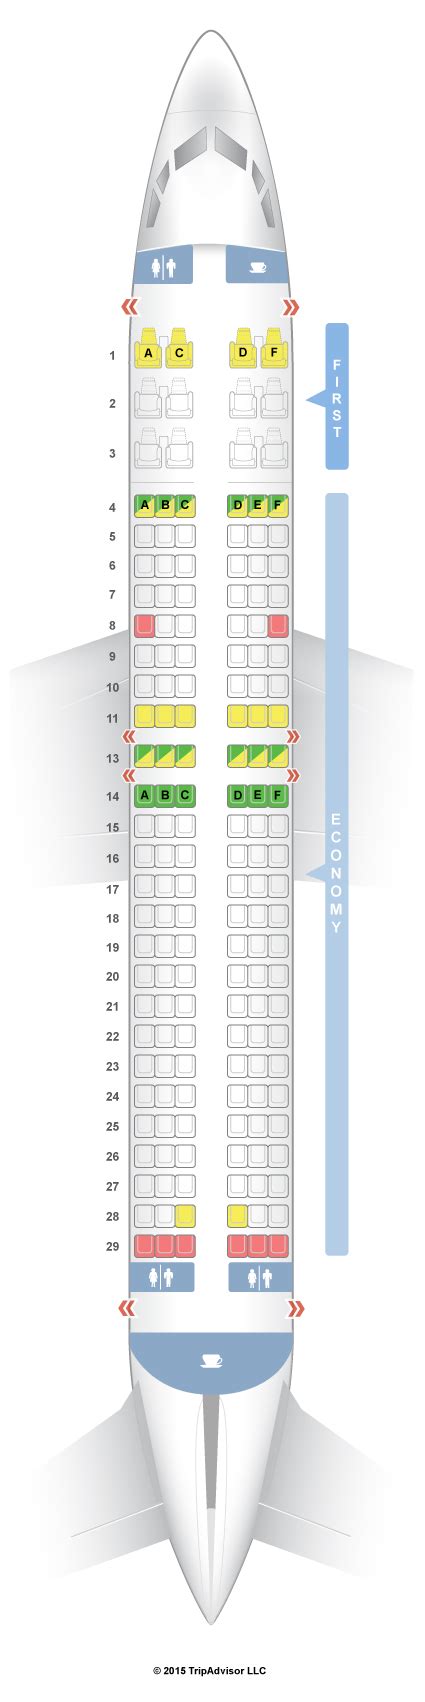 boeing 737 seating chart sun country